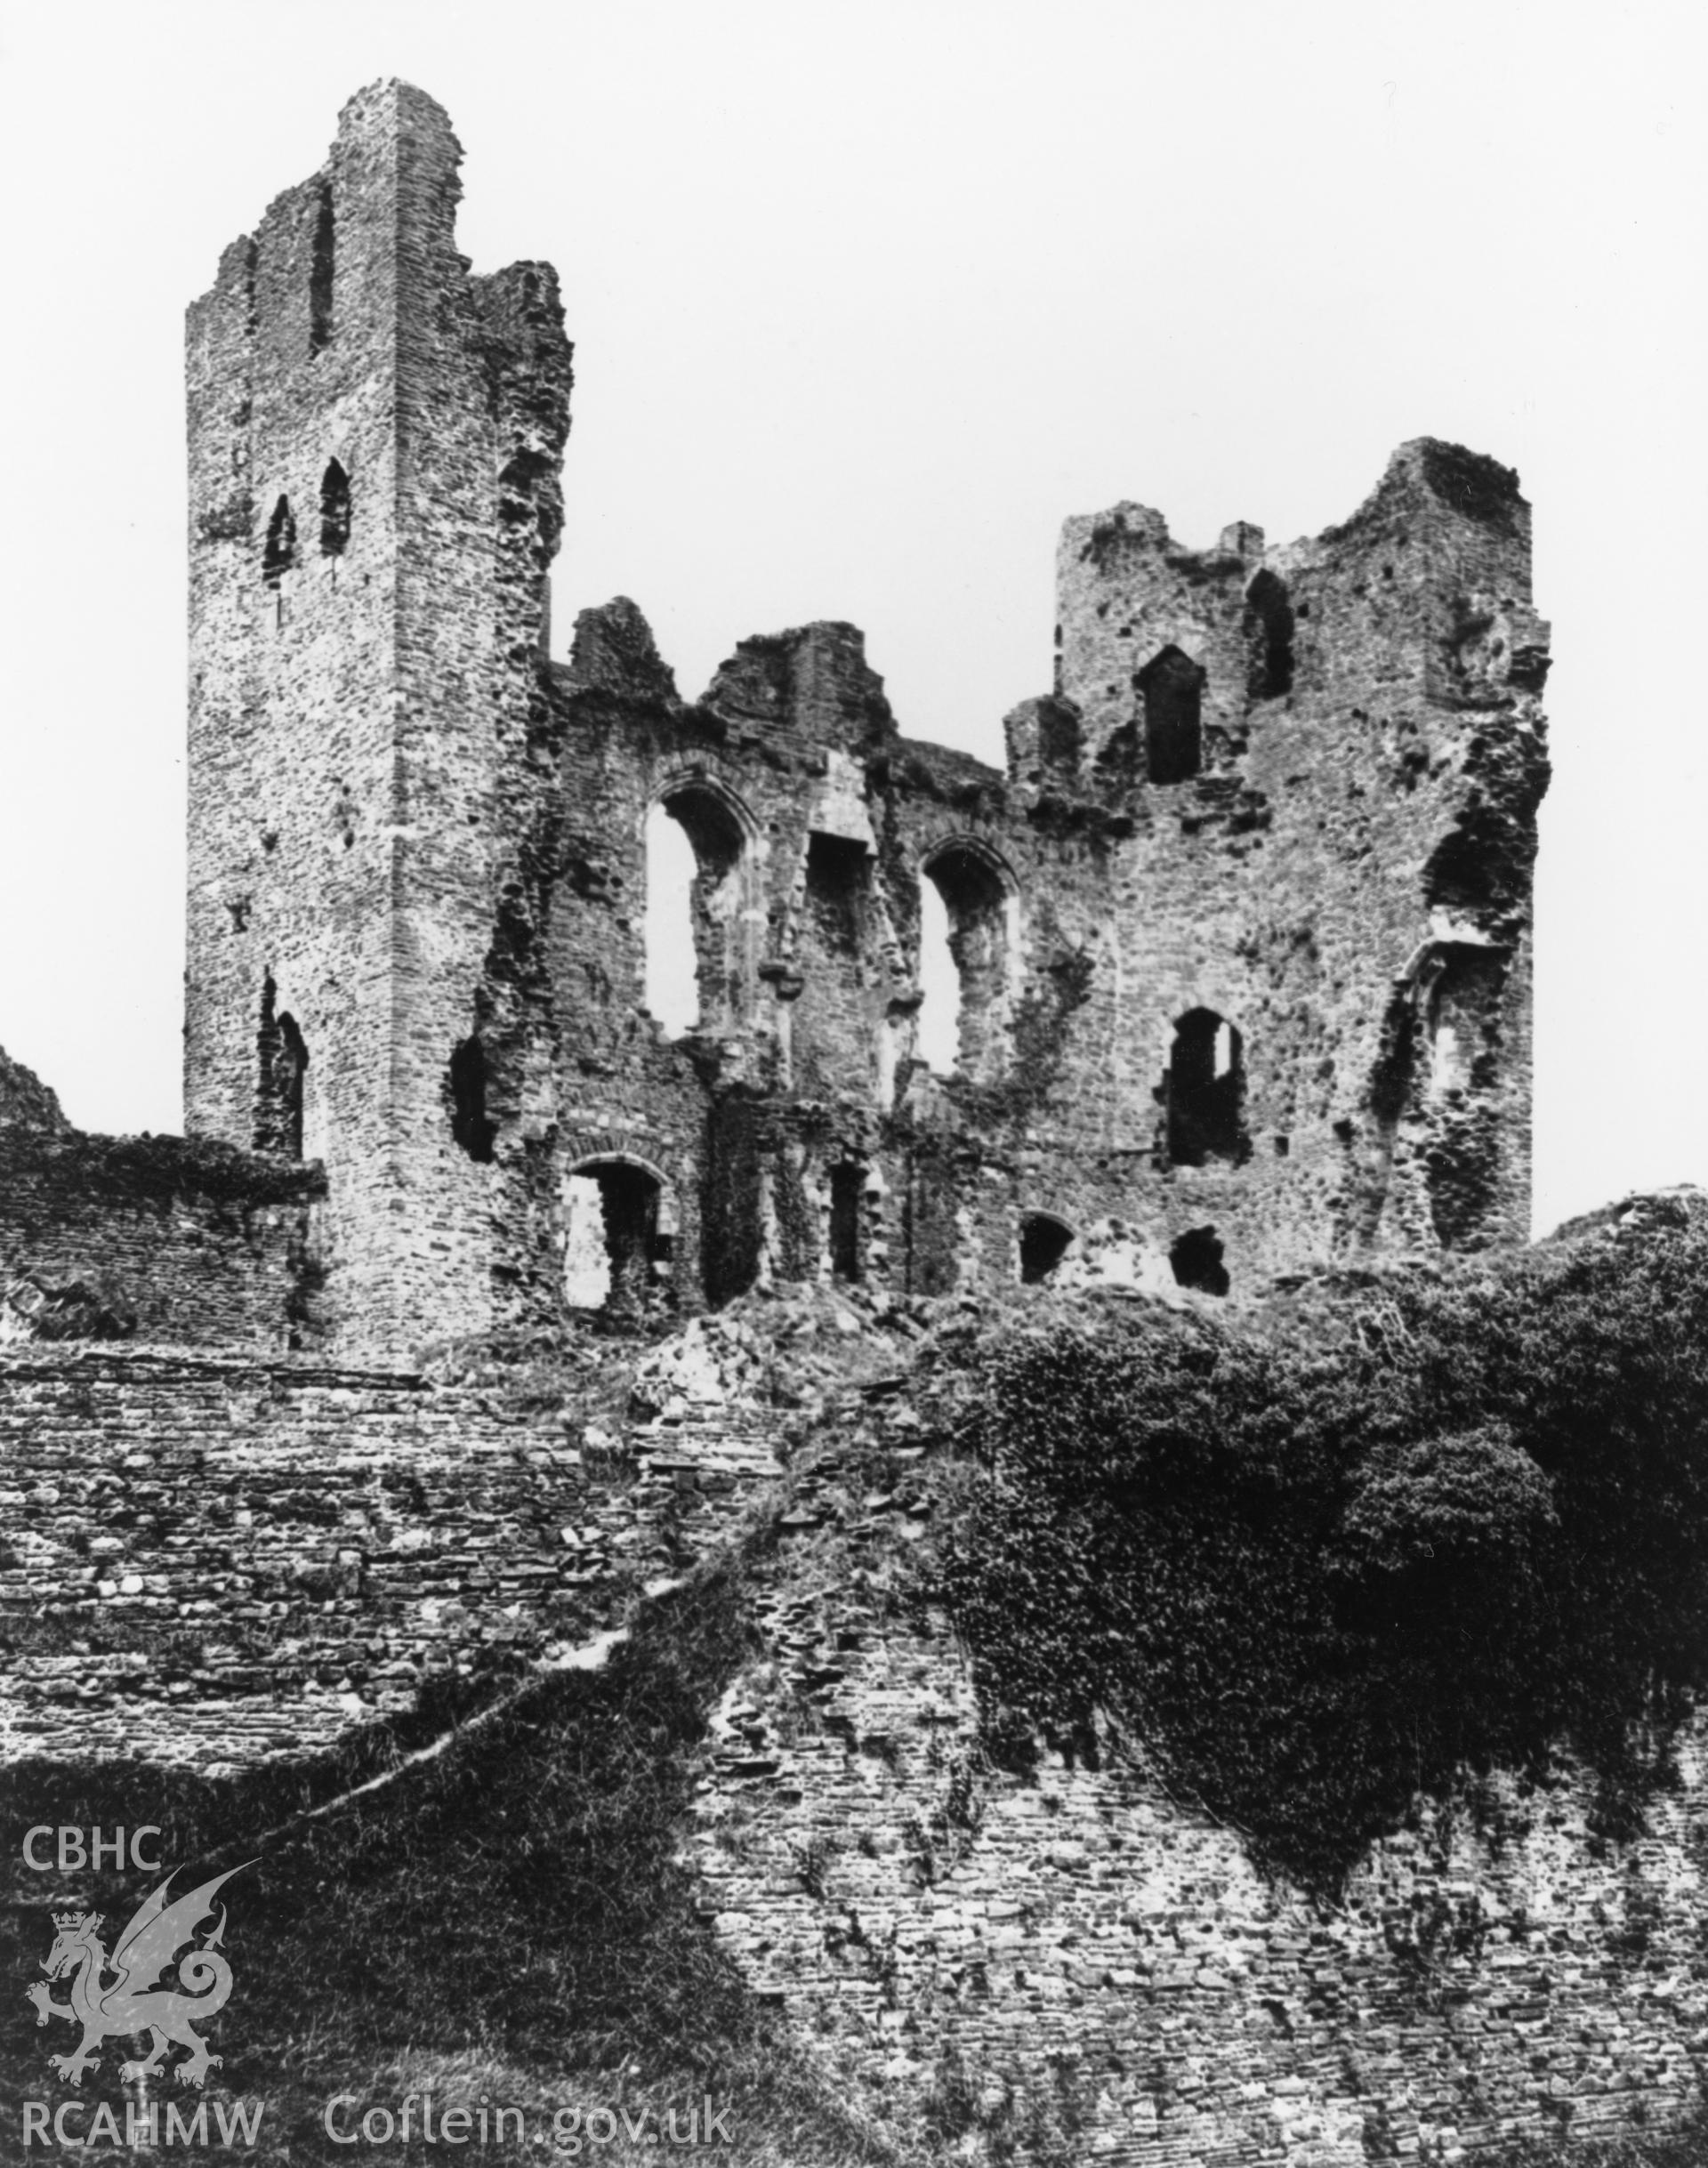 Caerphilly Castle; black and white photograph of unknown date, showing the eastern gatehouse, produced by RCAHMW